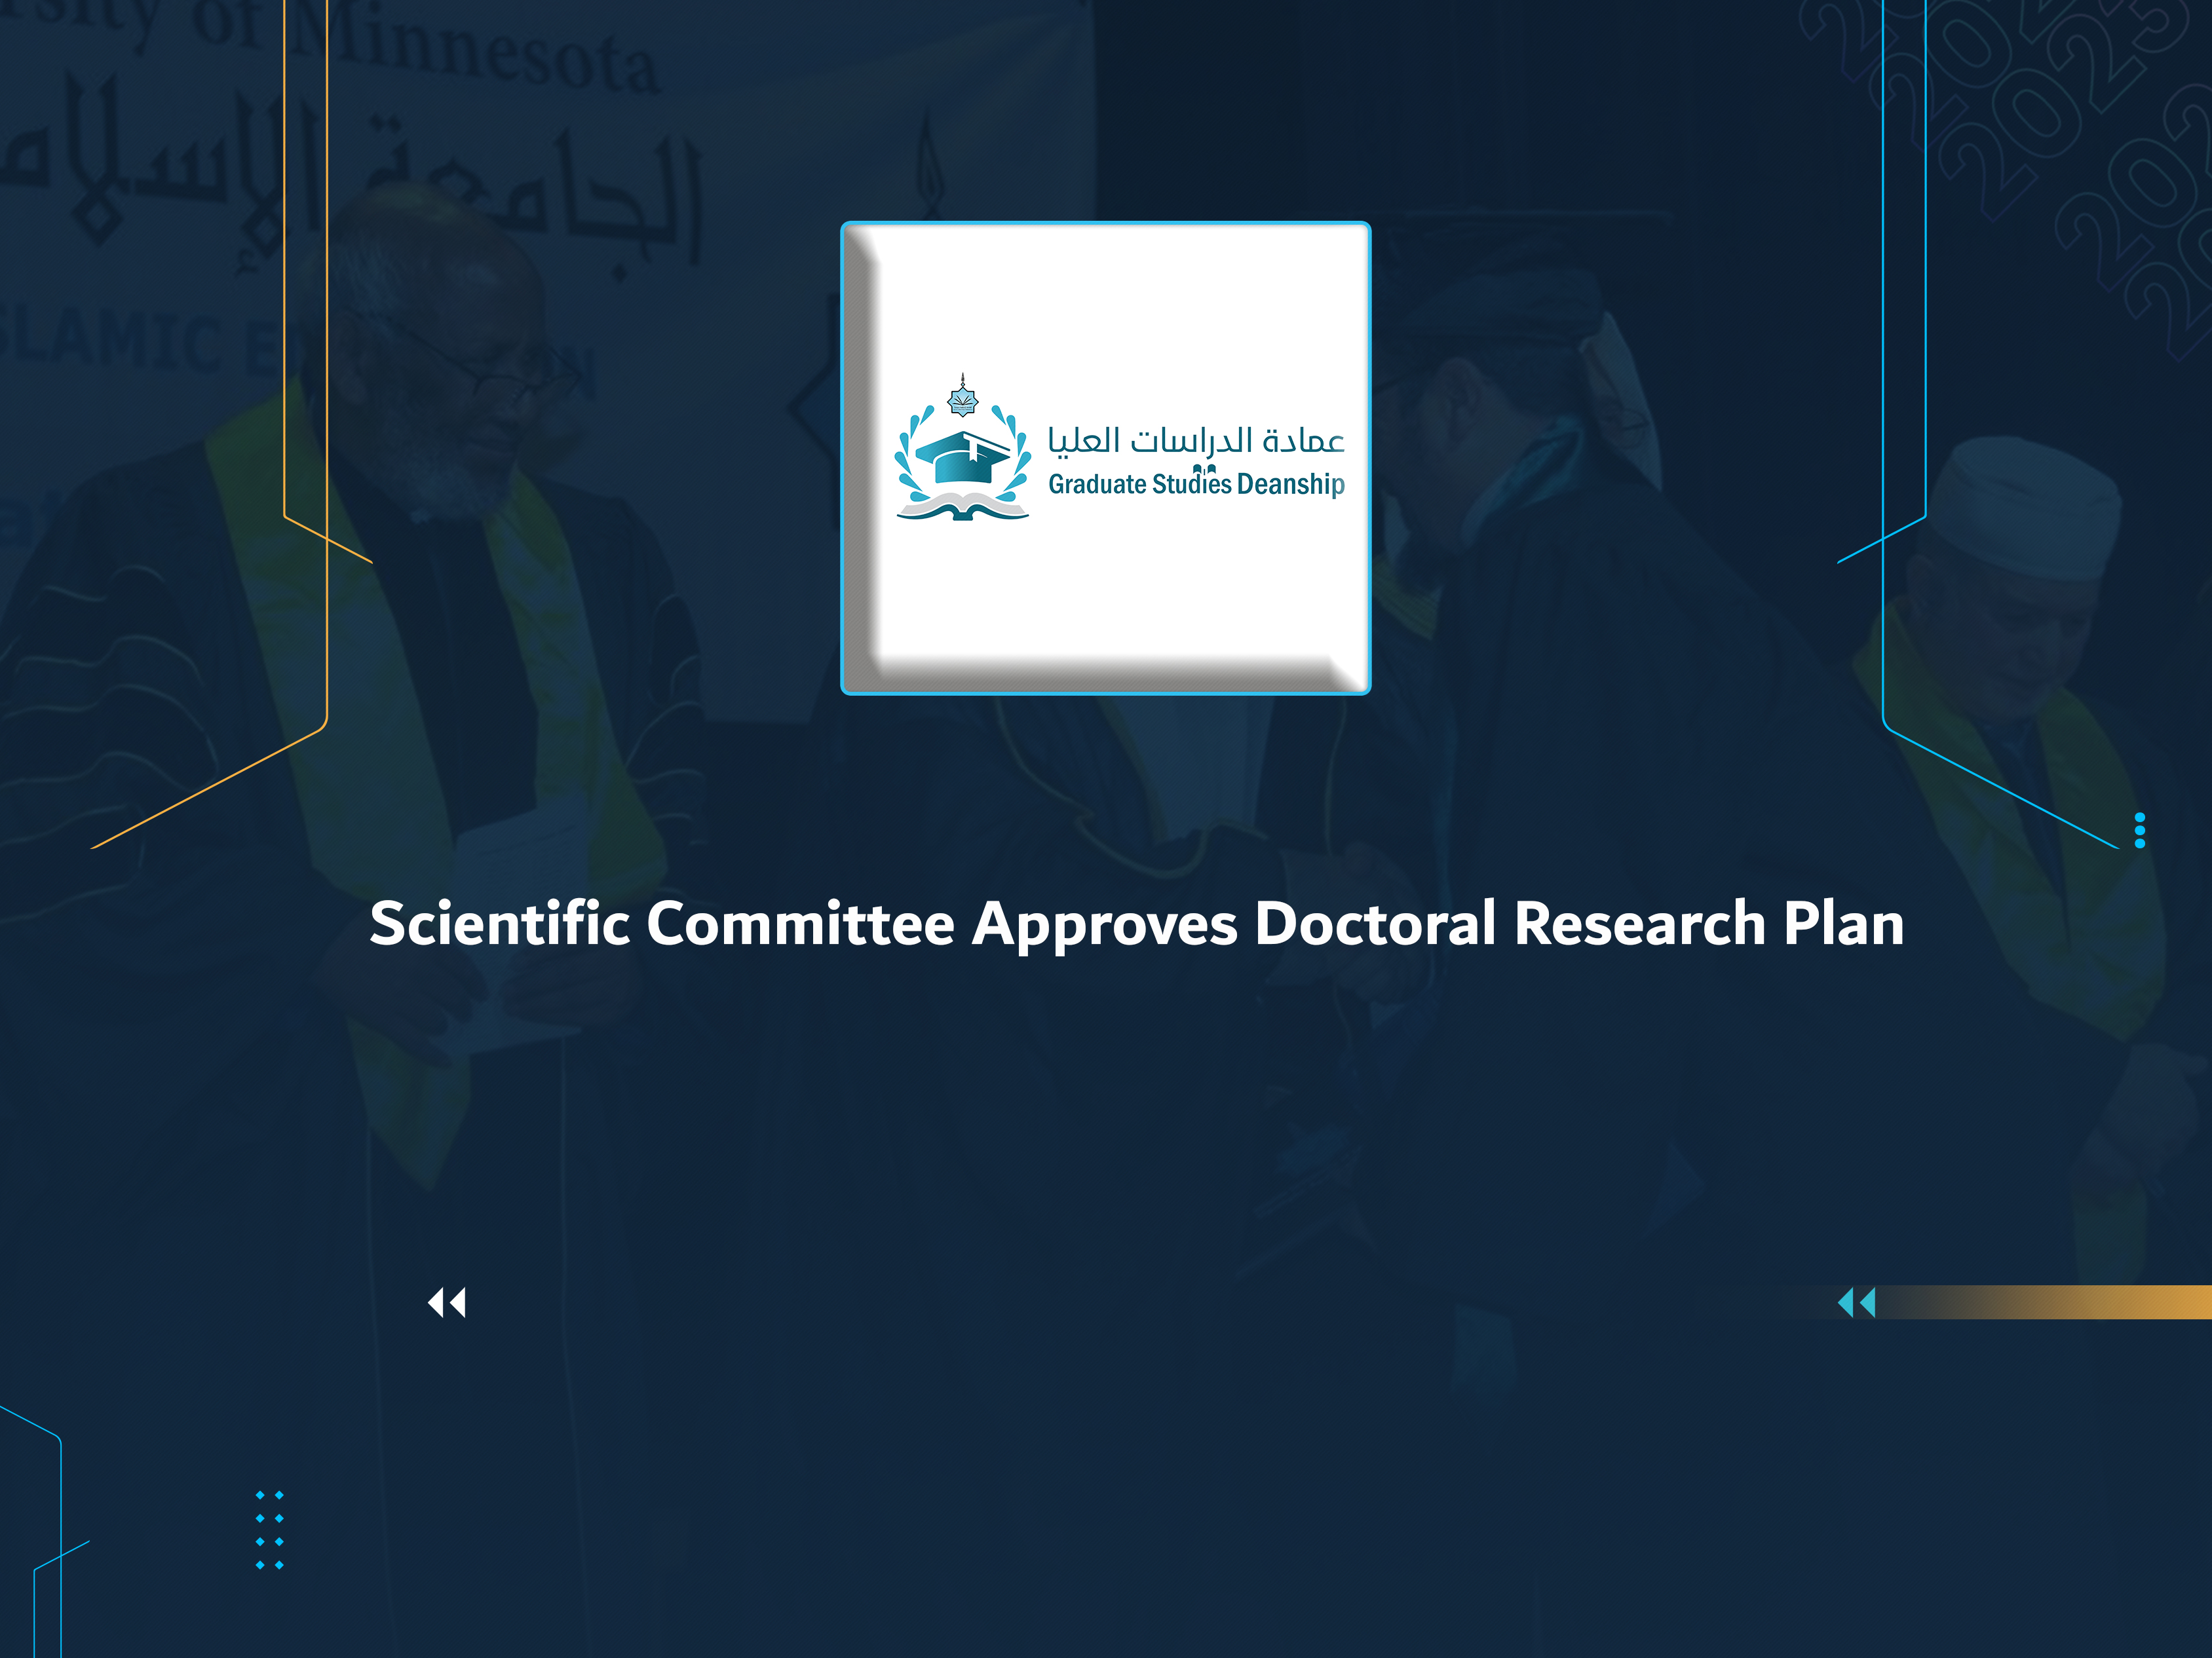 Scientific Committee Approves Doctoral Research Plan